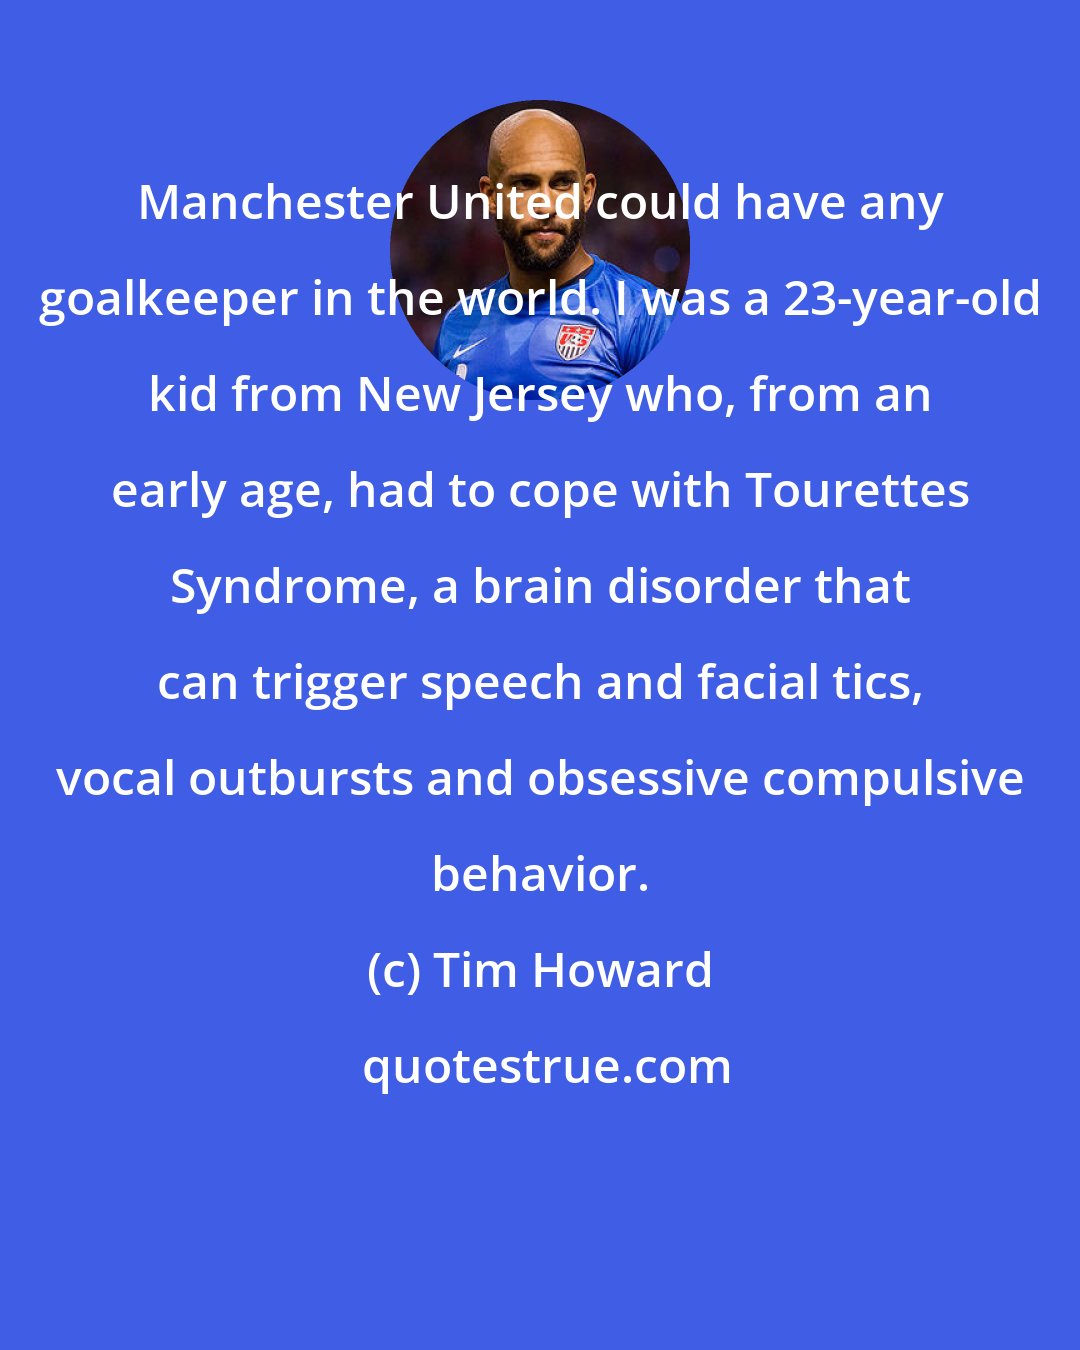 Tim Howard: Manchester United could have any goalkeeper in the world. I was a 23-year-old kid from New Jersey who, from an early age, had to cope with Tourettes Syndrome, a brain disorder that can trigger speech and facial tics, vocal outbursts and obsessive compulsive behavior.